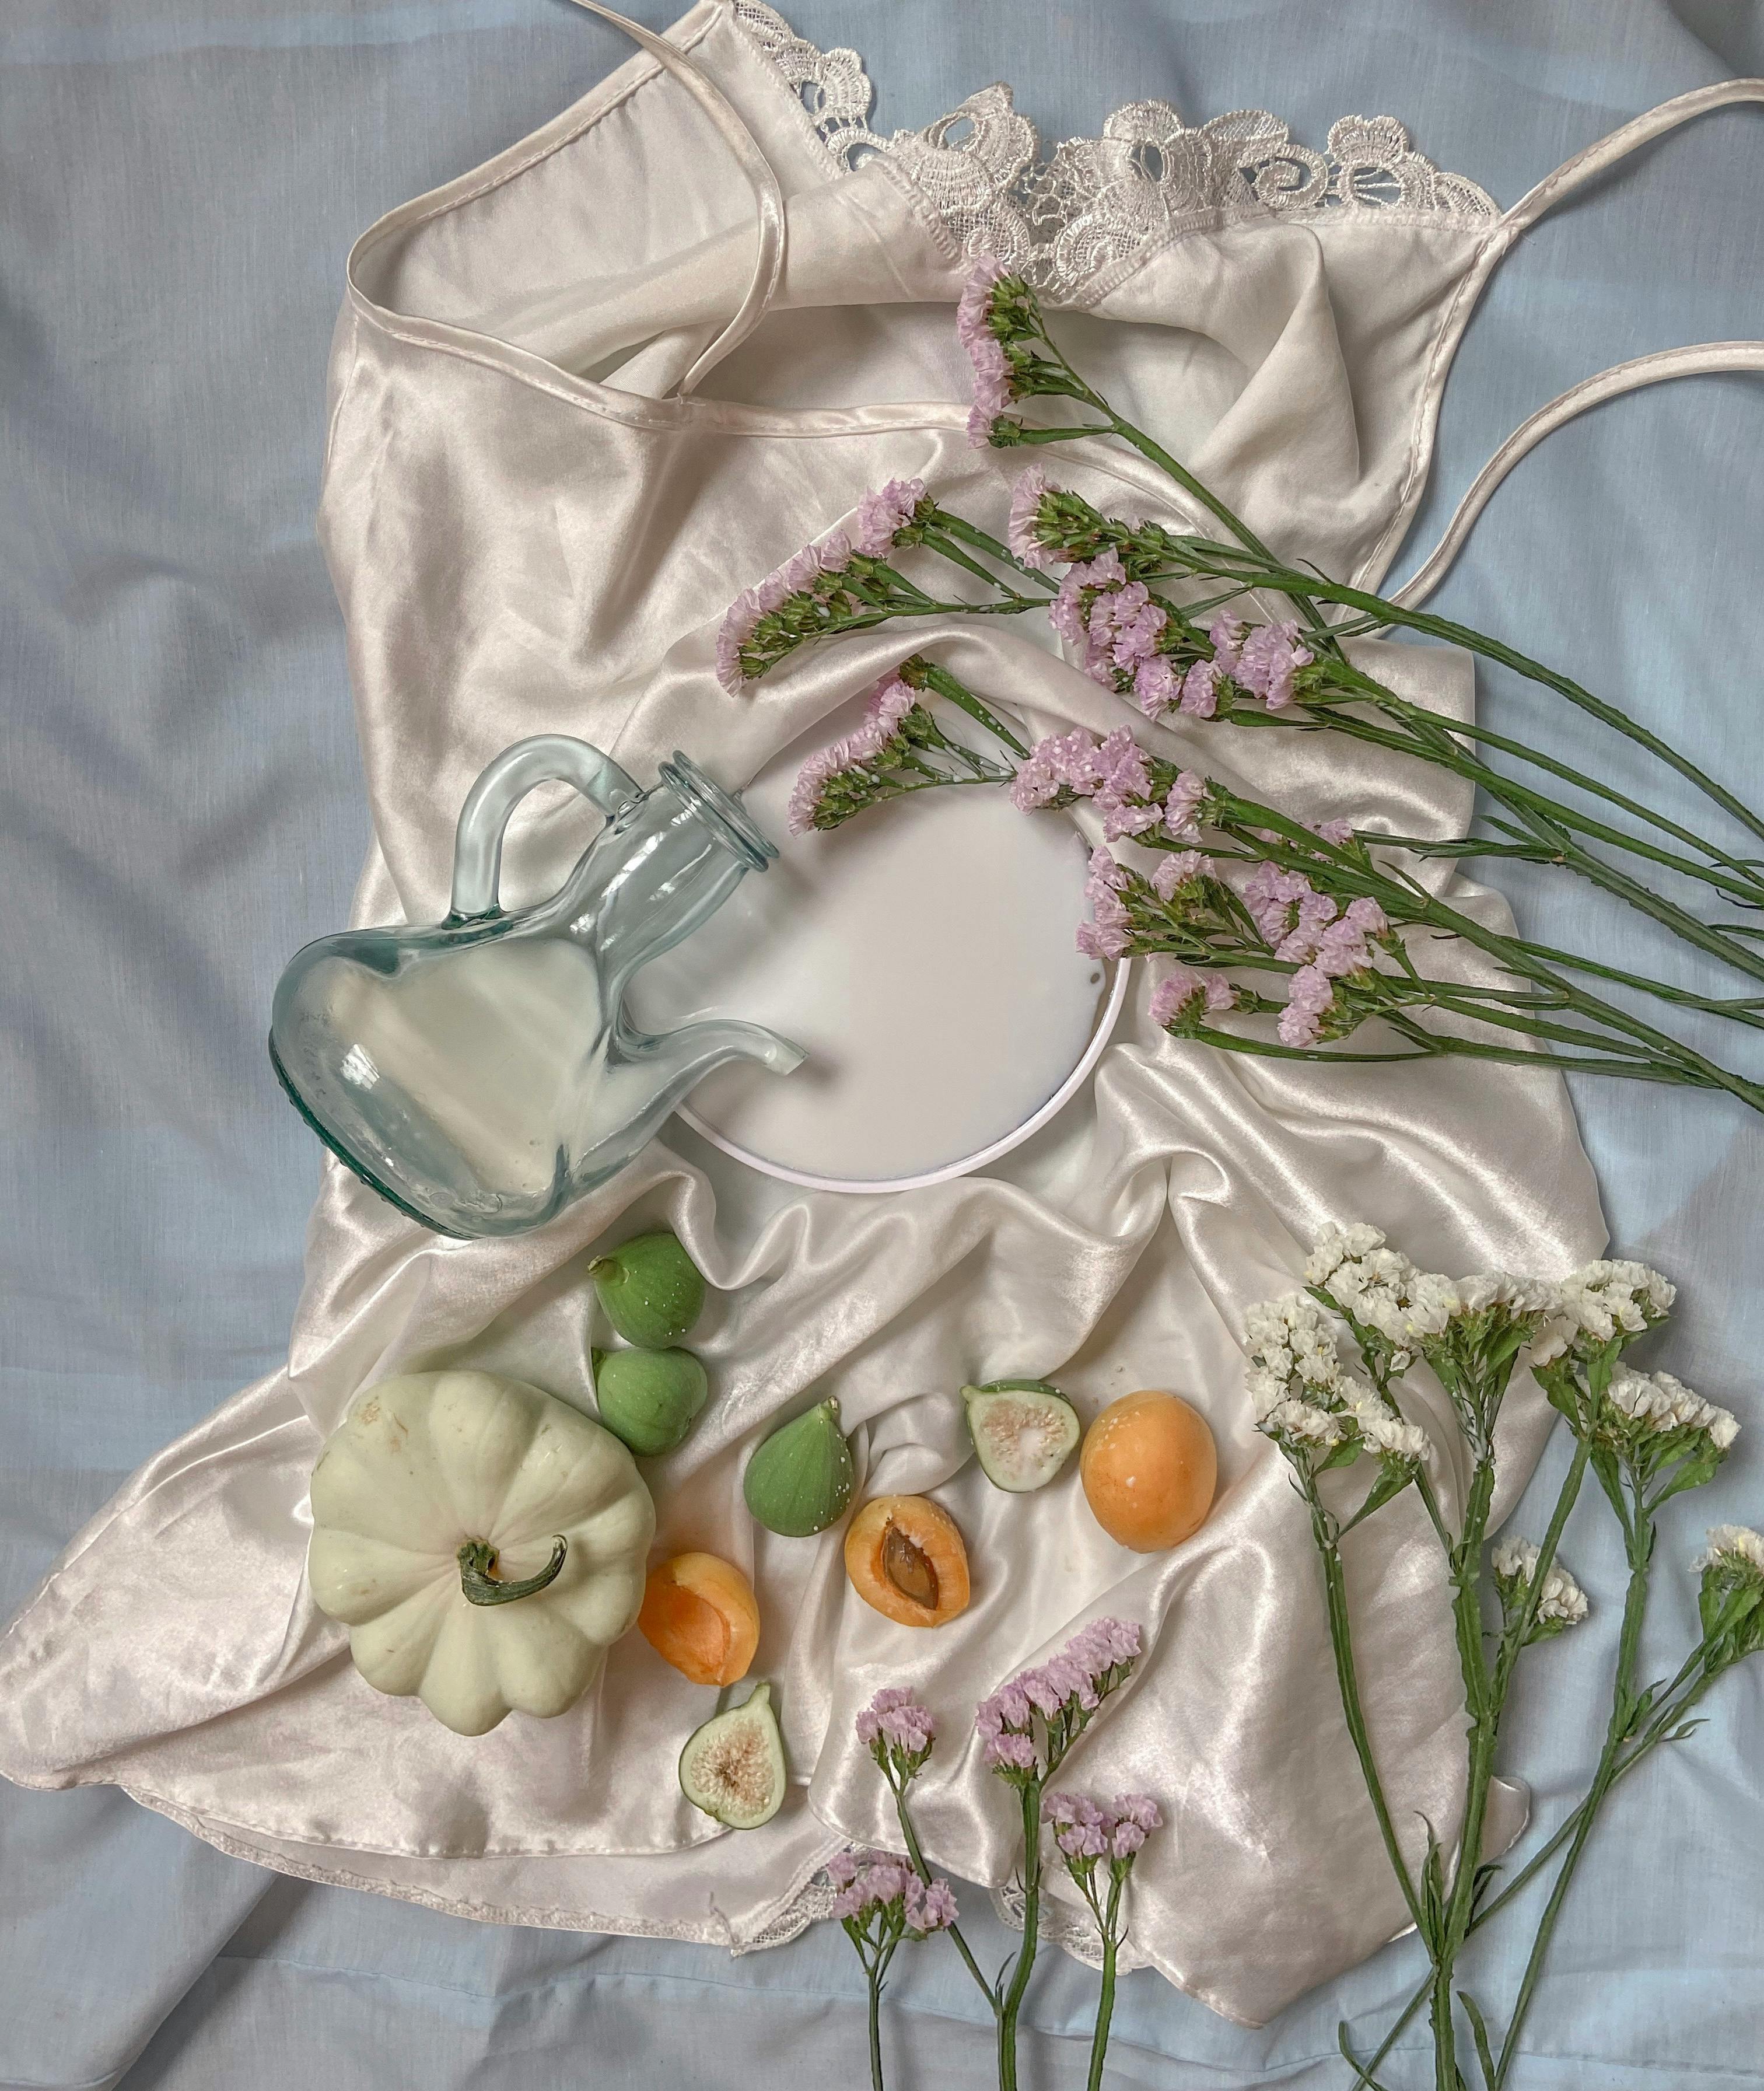 arrangement of fruits and flowers on nightwear